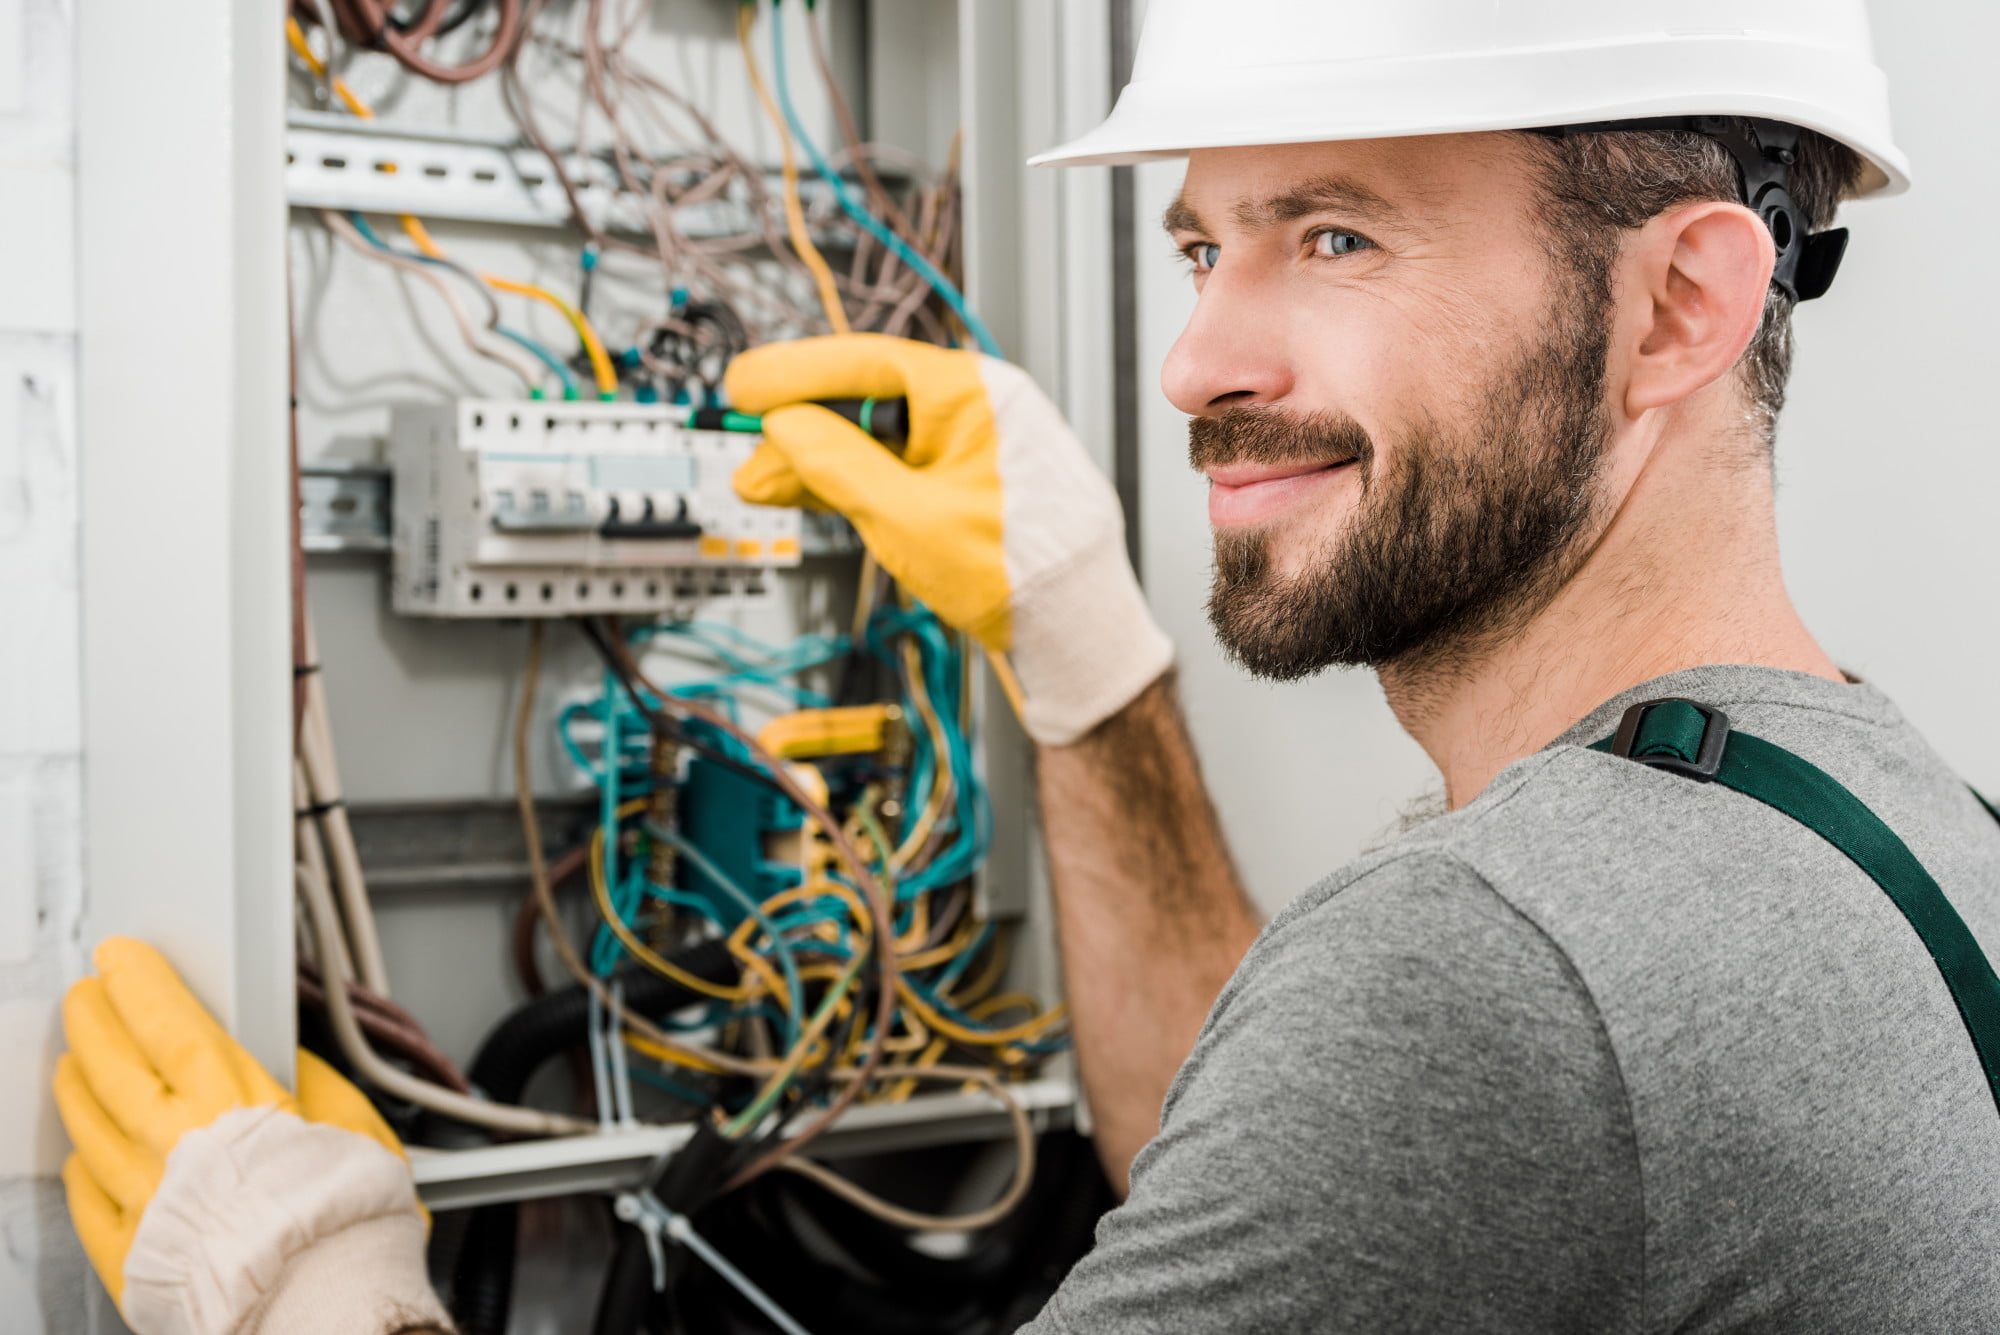 Are you looking to hire a trustworthy electrician for your business? Click here for a business owner's guide to hiring a commercial electrician.